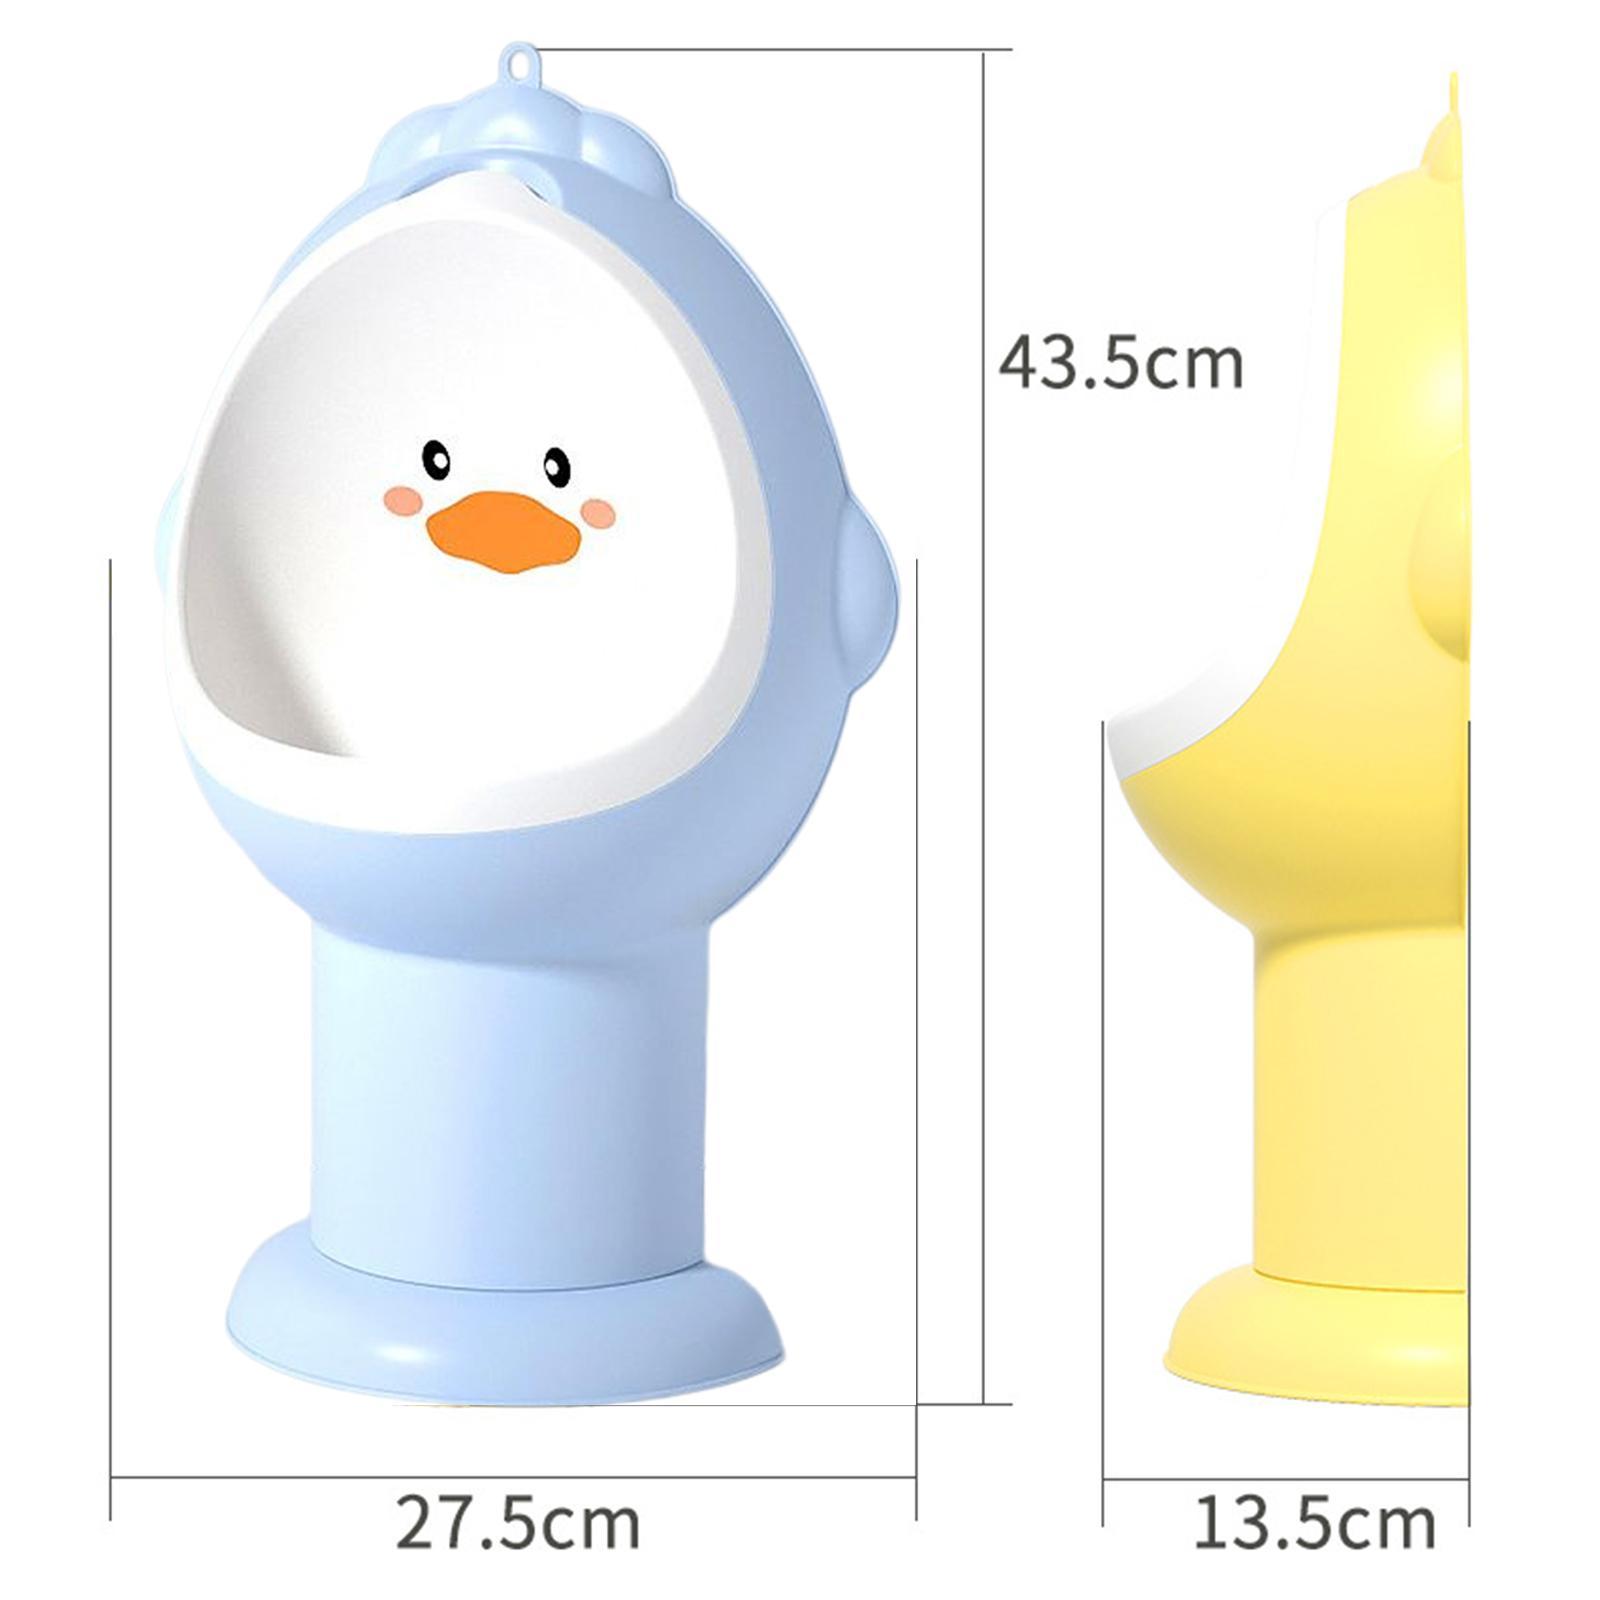 Children Stand Vertical Urinal Portable with Cleaning Brush for Bathroom